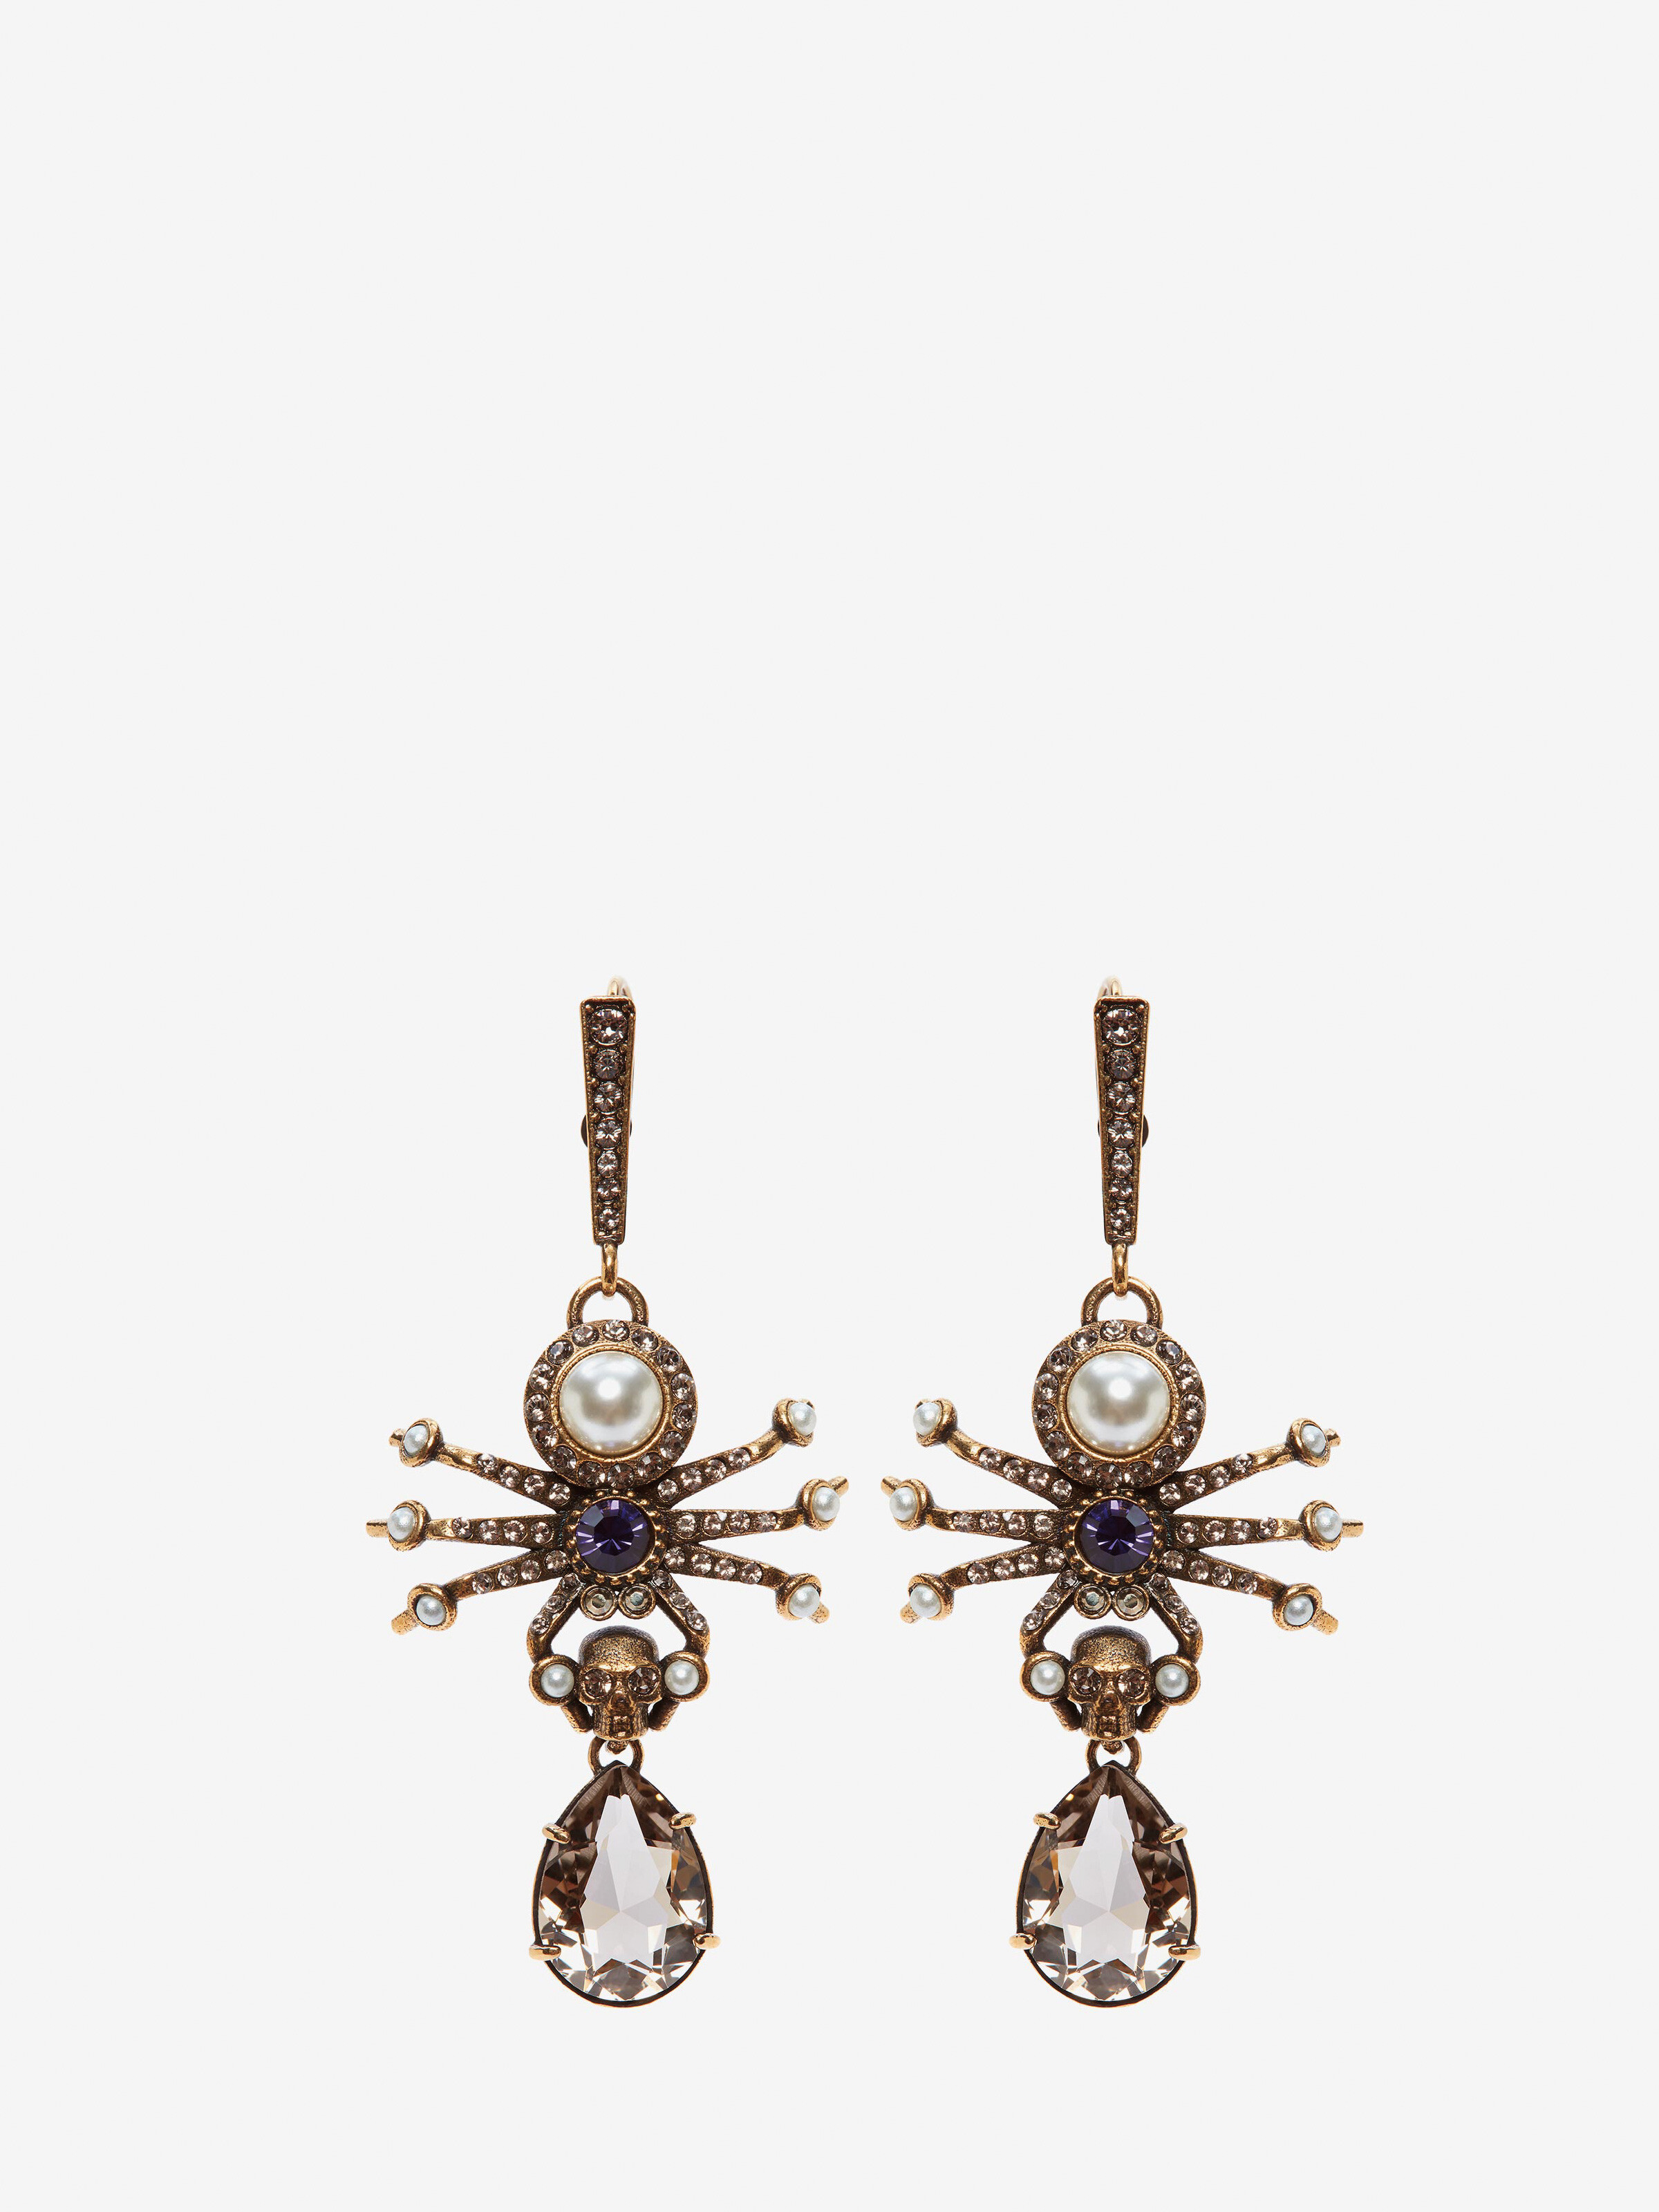 Spider Earrings in Antique Gold 